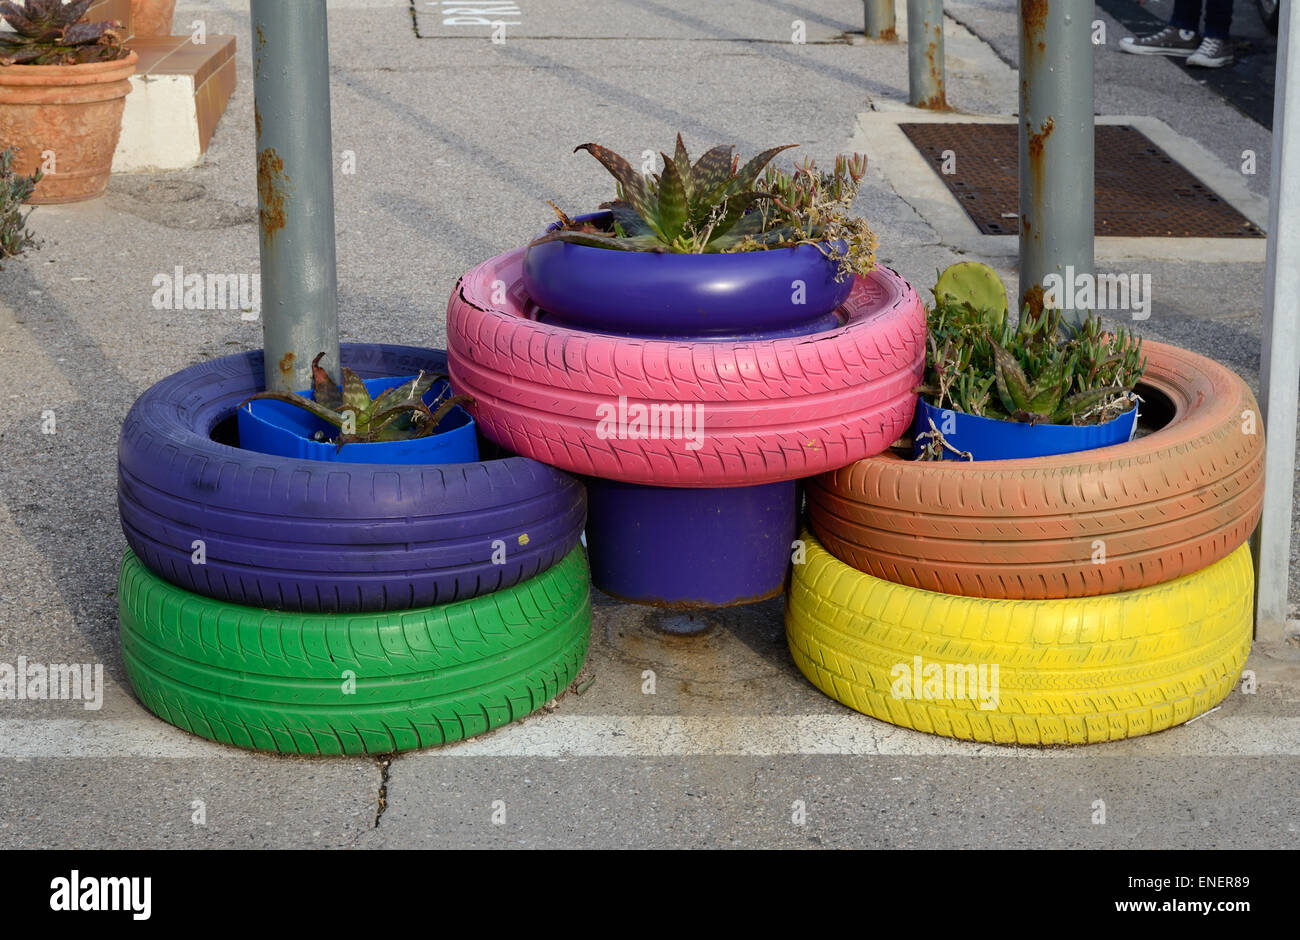 Painted Tires or Tyre Planters or Colourful Rubber Plant Pots Stock Photo